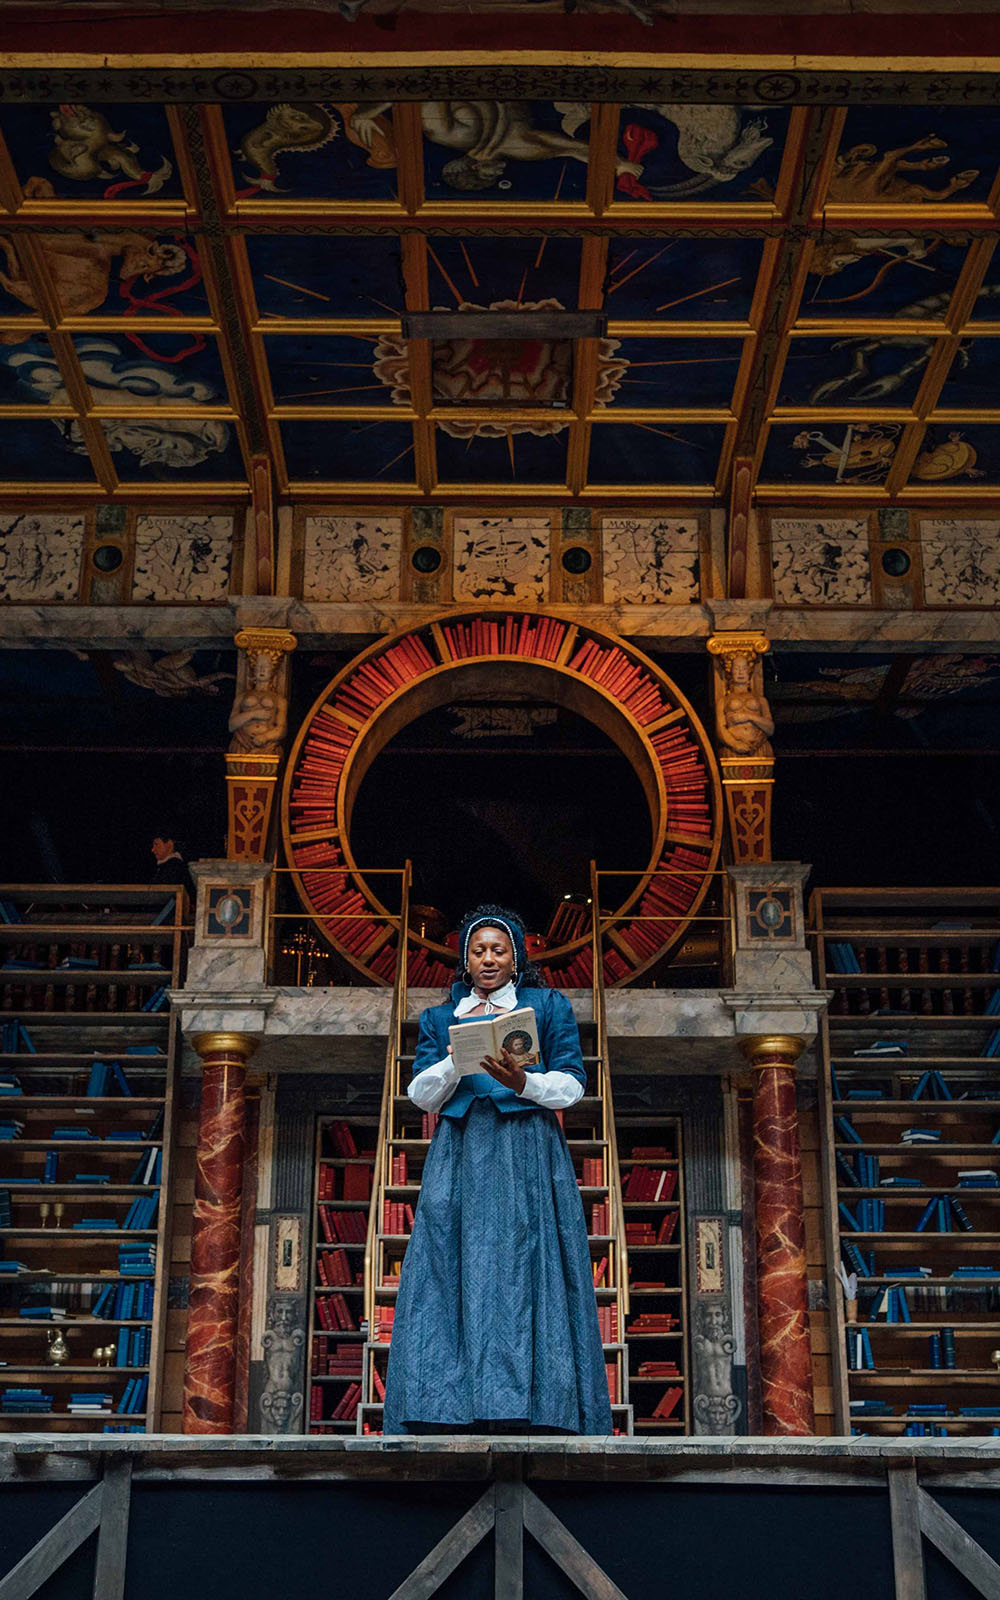 A woman wearing a blue Elizabethan corset dress stands on stage, reading a book, with shelves of bookcases behind her.